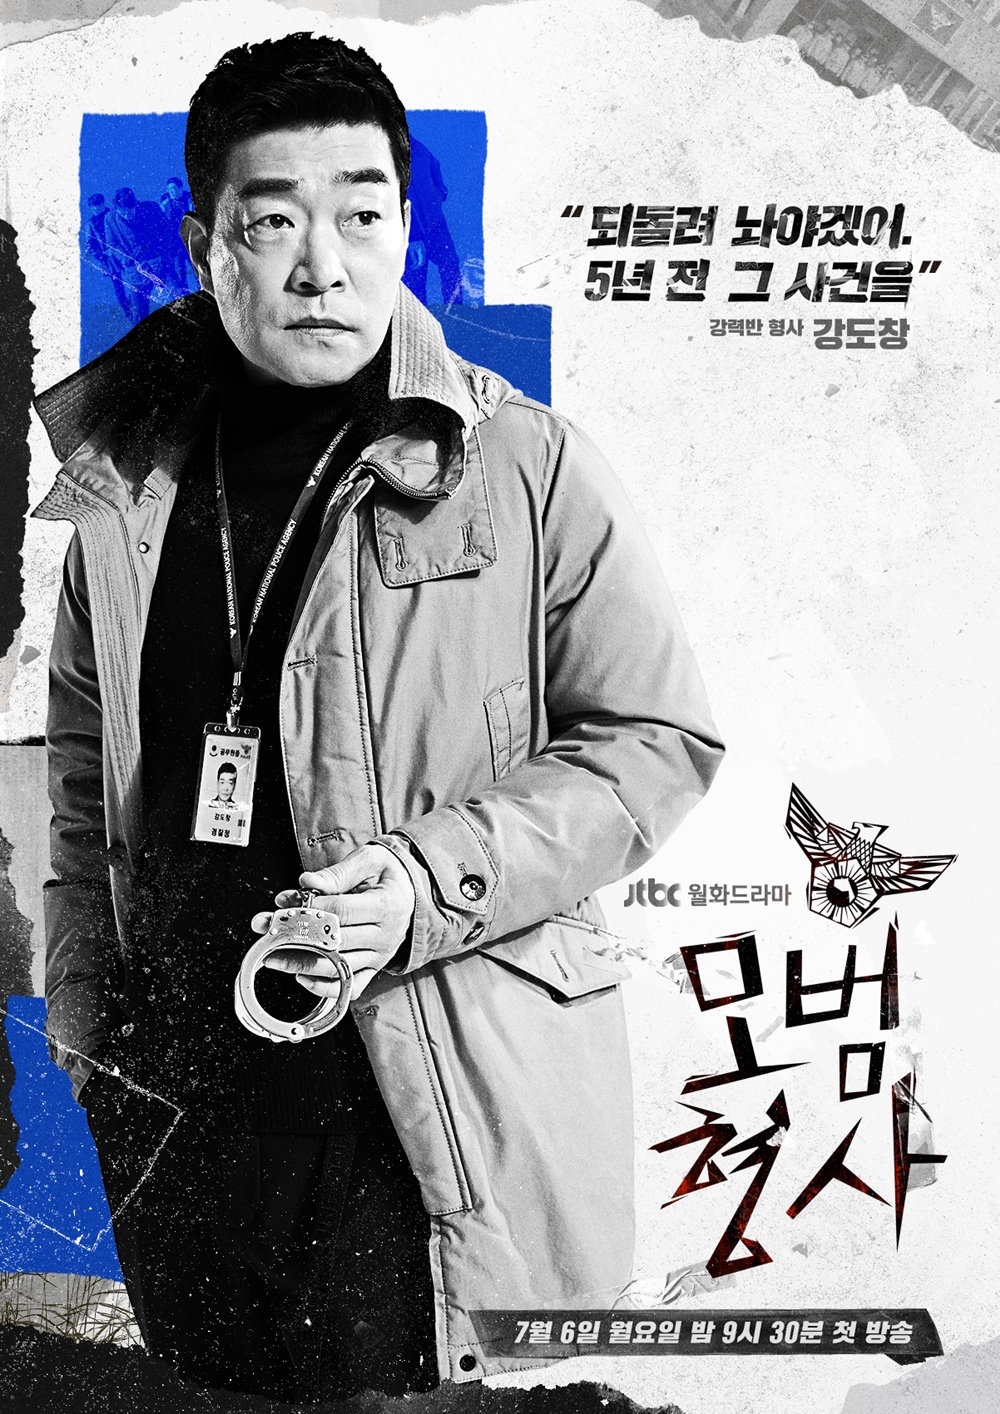 Seoul=) = The Good Detective revealed the character poster of Son Hyun-joo Jang Seung-jo Lee Elijah.JTBCs New Moonwha Drama The Good Detective (playplayplay by Choi Jin-won/director Cho Nam-guk) unveiled a character poster featuring Son Hyo-jo Jang Seung-jo Lee Elijah on the 11th.The Character Poster is a black and white monotone using collage techniques.First, the character poster of the life-style veteran Detective Kang Do-chang (Son Hyun-joo Boone) is showing off his spleen visuals with handcuffs.Kang Do Chang is a delightful and humane Detective, who is trying to maintain a Detective life with the Good Detective, such as maintaining the phenomenon as a salary earner and sometimes compromising with reality.However, the goal of returning the five years ago is to show a different appearance from the past.Oh Ji-hyeok (Jang Seung-jo) is a sophisticated black suit that reveals the aspect of luxury elite Detective.Oh Ji-hyeok has been on the elite course as the top of the Seoul Gwangsudae service rating from the police force. Recently, he has inherited a huge legacy from his uncle and has a luxurious life that does not have to give up to money and power.Meanwhile, The Good Detective is an exciting rhetoric that tracks a single truth that is covered up by two different Detectives.I finished shooting in May and plan to go to A house theater with well-made drama by concentrating on the second half work.It will be broadcasted for the first time on July 6 at 9:30 pm.